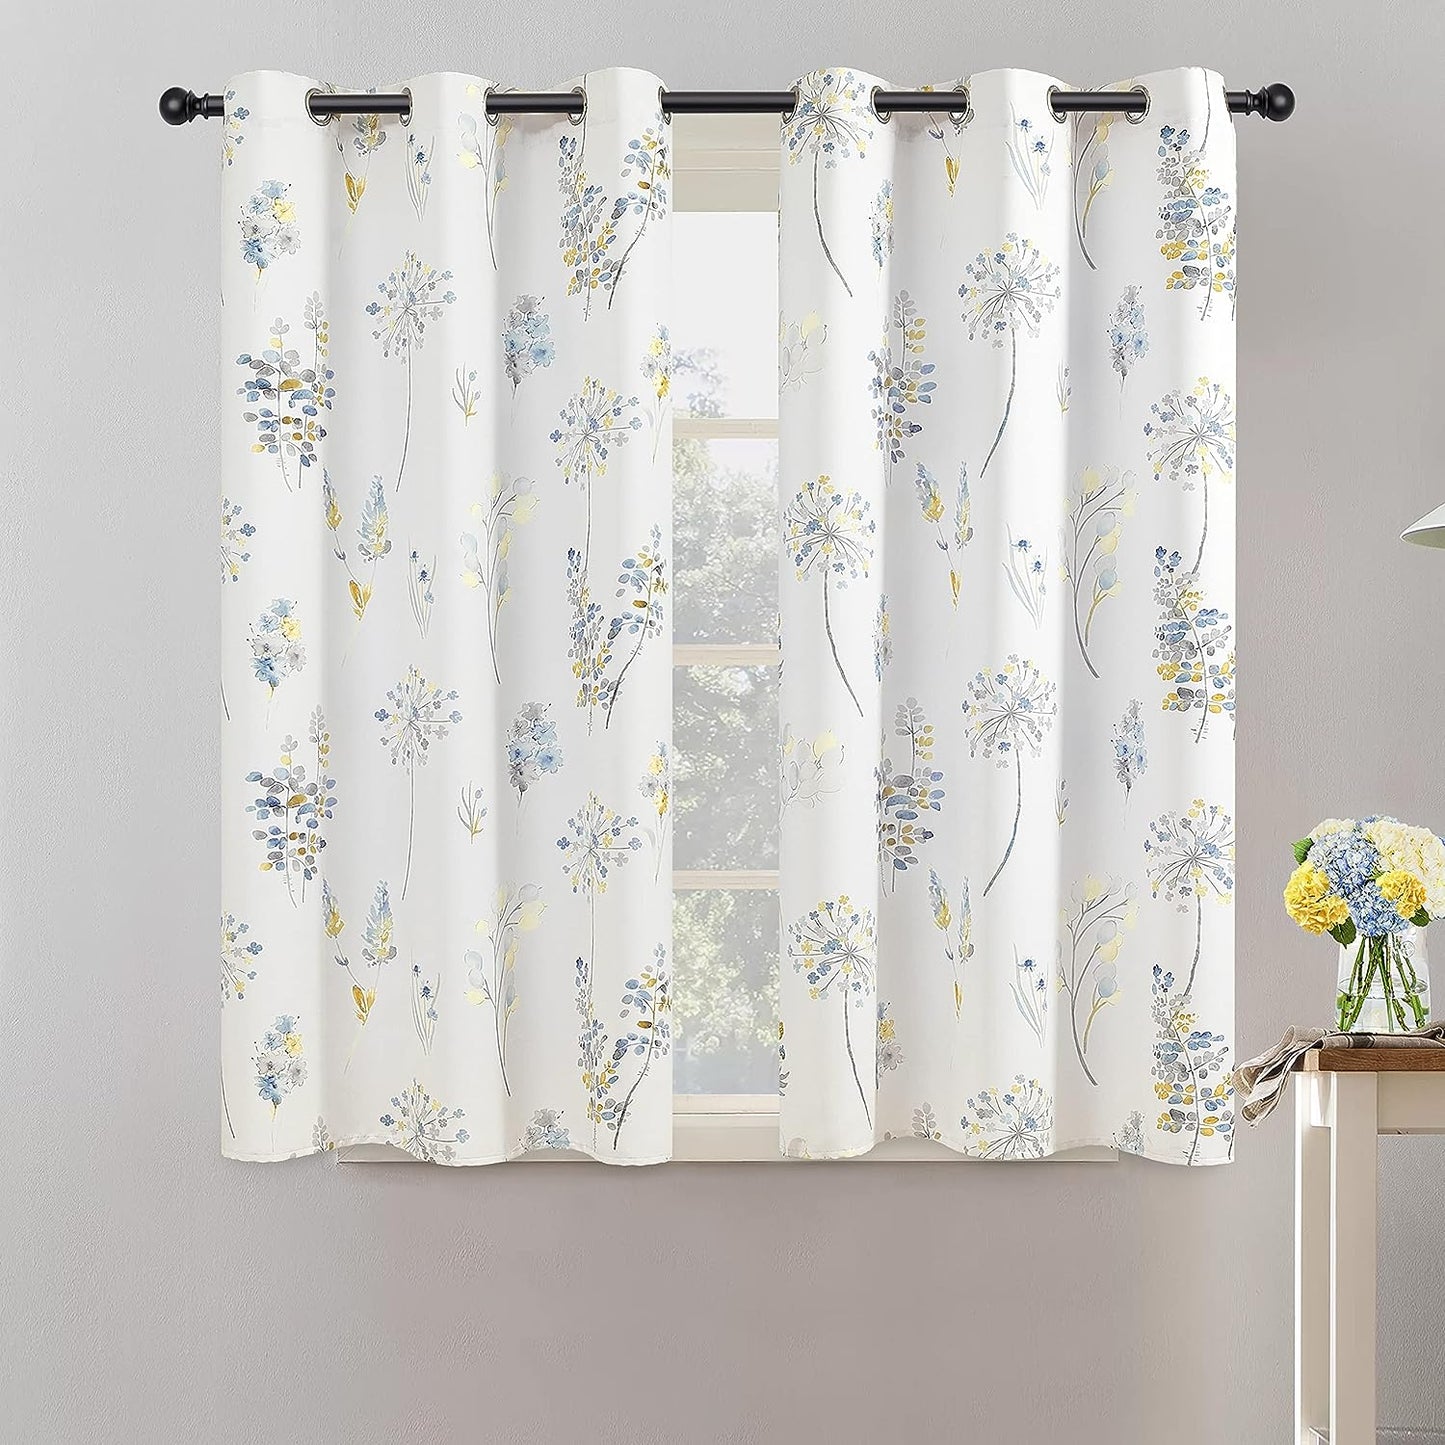 XTMYI 63 Inch Length Sage Green Window Curtains for Bedroom 2 Panels,Room Darkening Watercolor Floral Leaves 80% Blackout Flowered Printed Curtains for Living Room with Grommet,1 Pair Set  XTMYI Yellow  Blue  Grey 34"X45" 